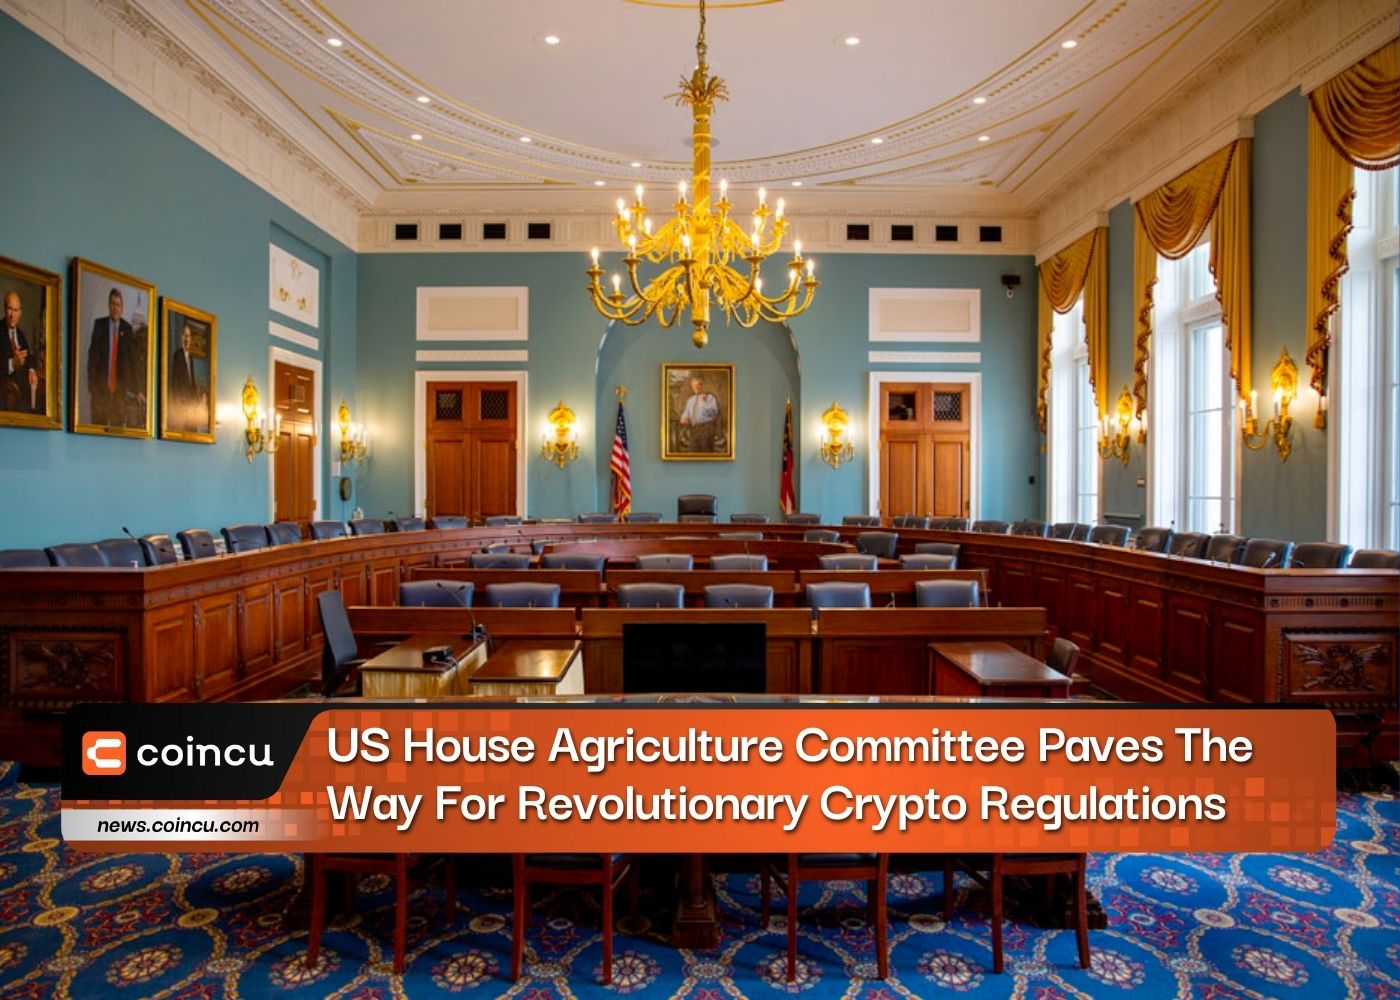 US House Agriculture Committee Paves The Way For Revolutionary Crypto Regulations